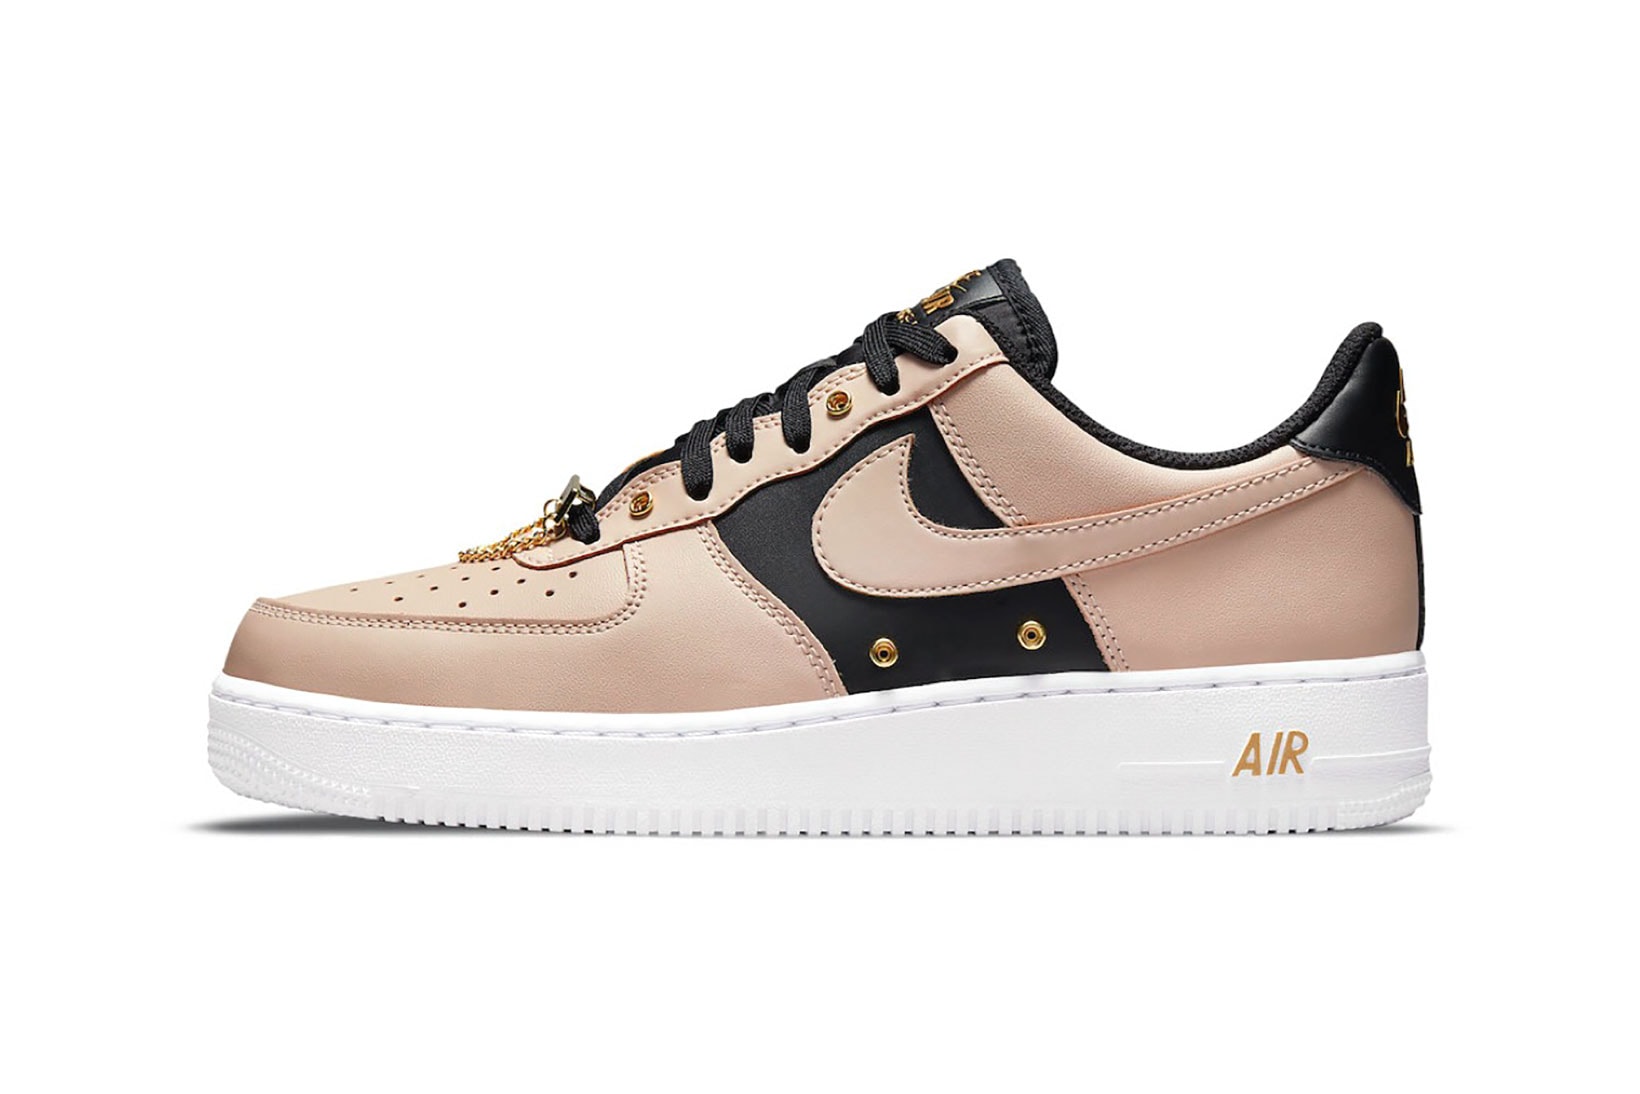 The Nike Air Force 1 Low Appears in White, Black, Tan and Brown